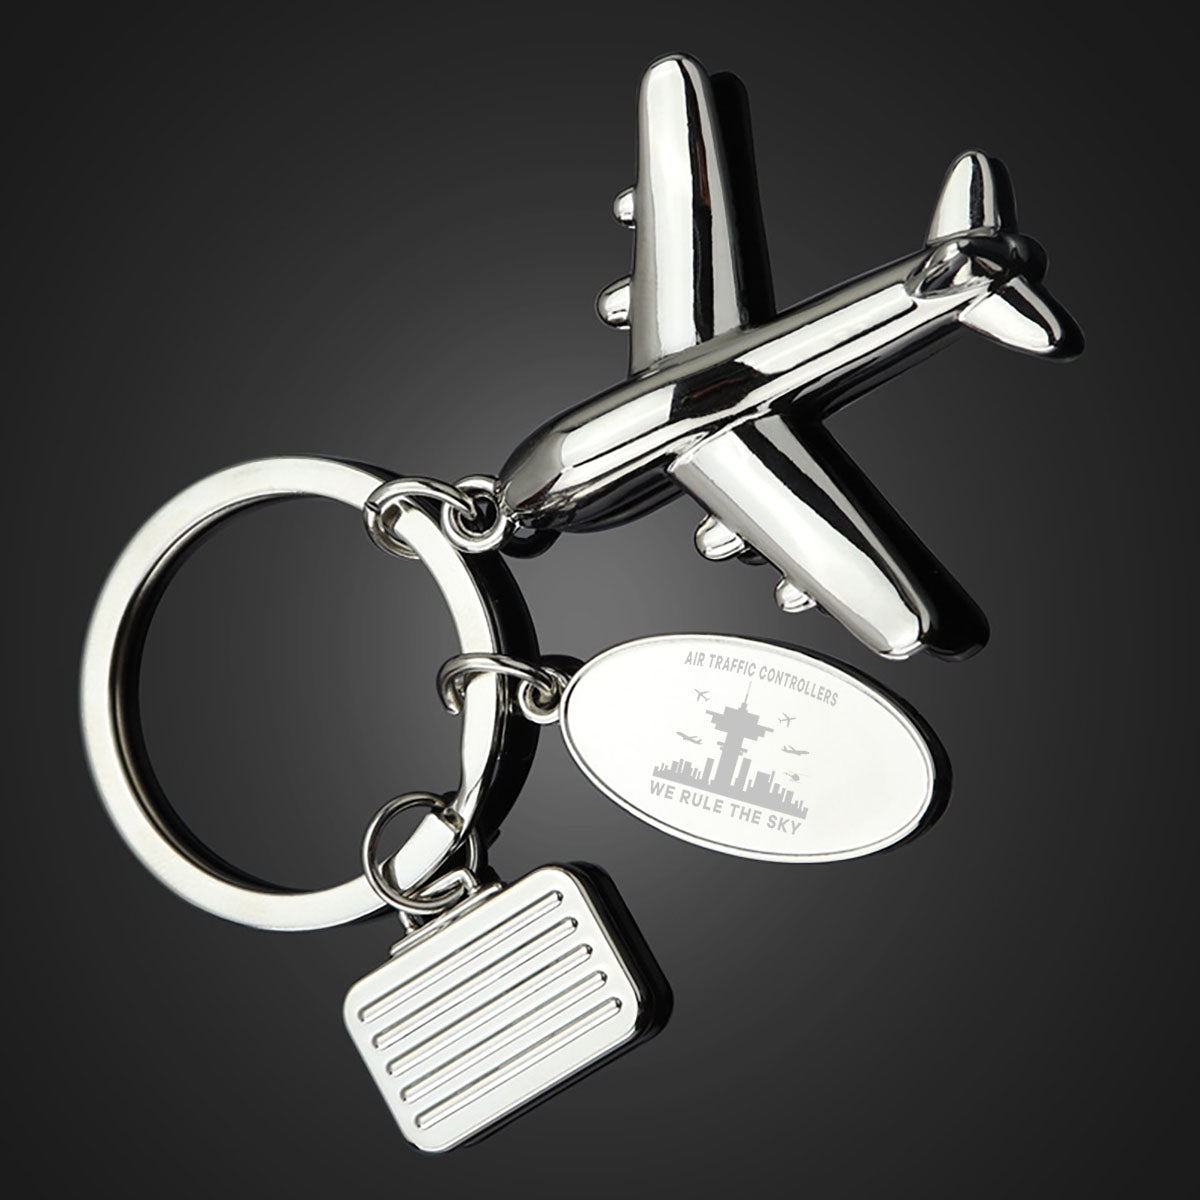 Air Traffic Controllers - We Rule The Sky Designed Suitcase Airplane Key Chains